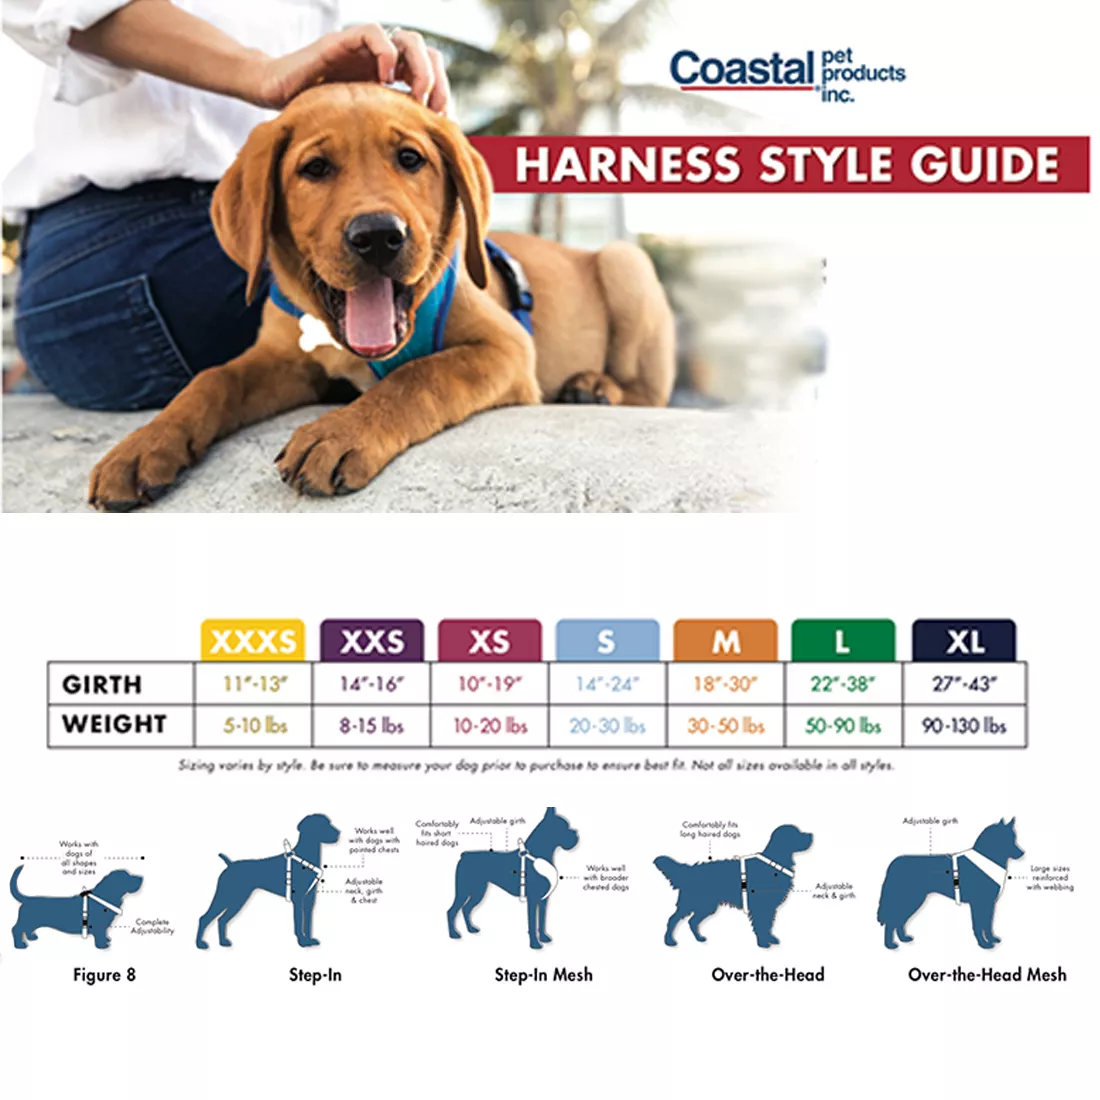 What Size Harness for My Dog?